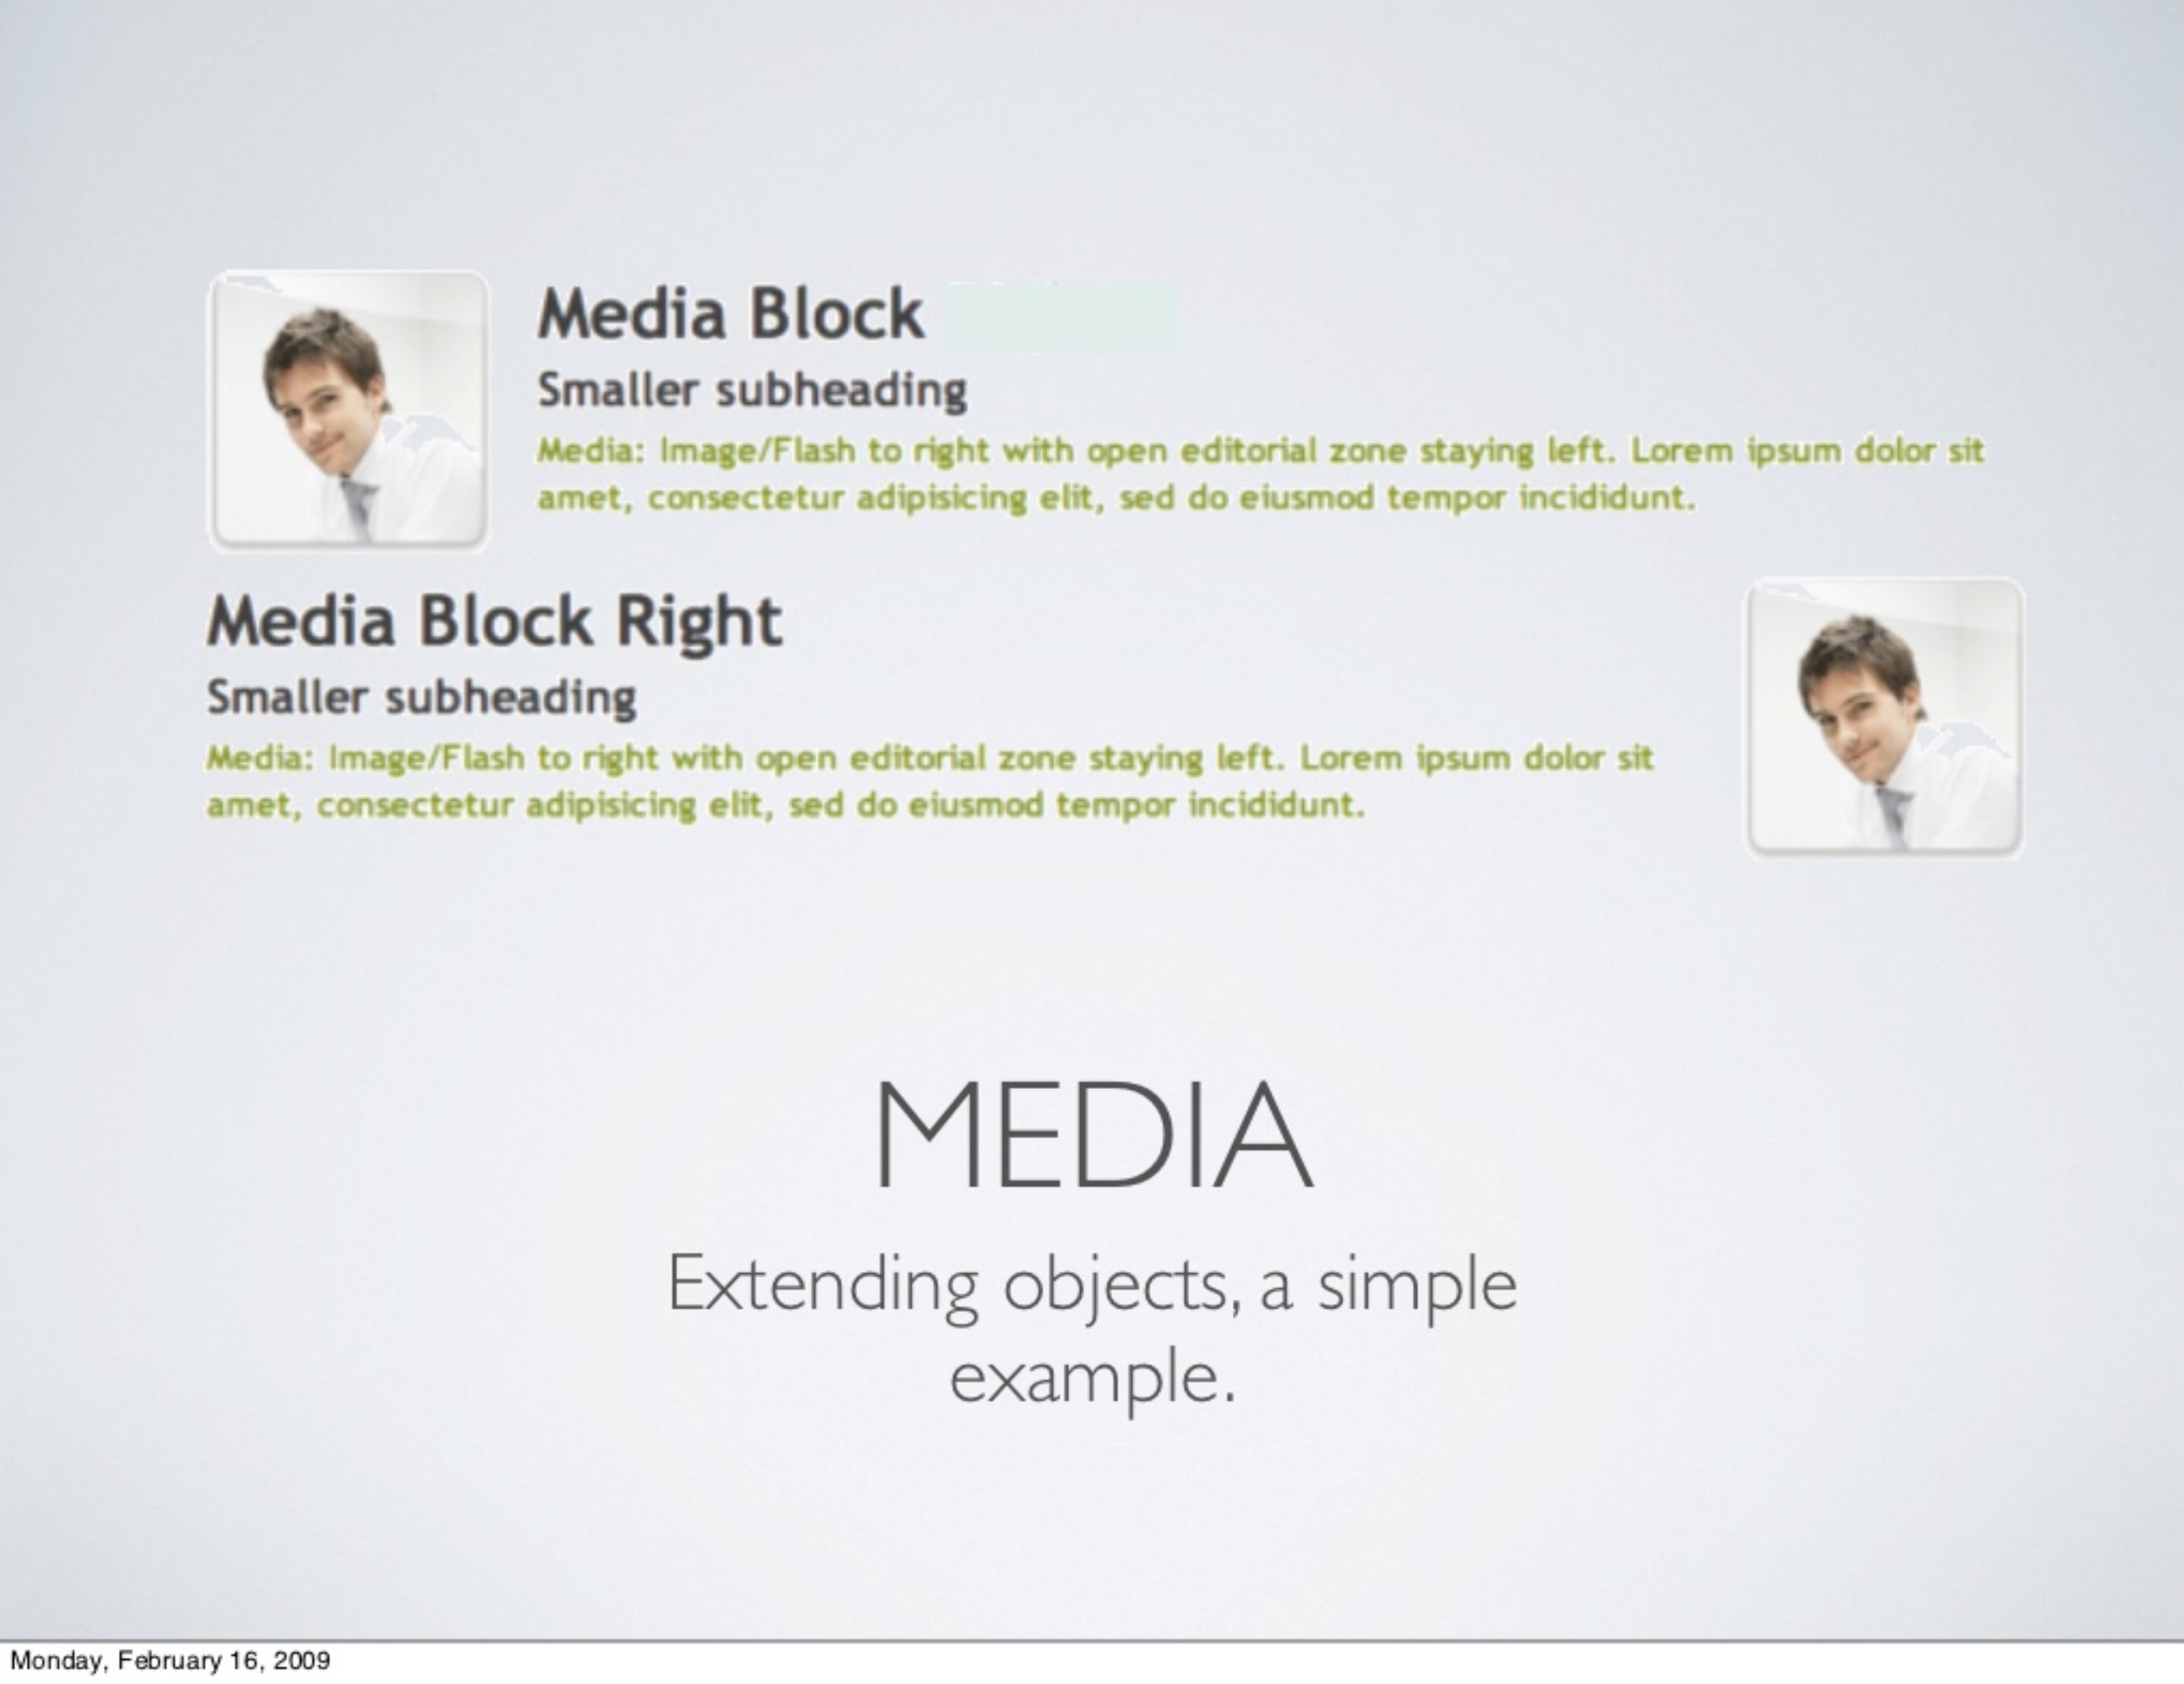 Media.
Extending objects, a simple example.
Block with media on left, and text on right.
Block with media on right, and text on left.
